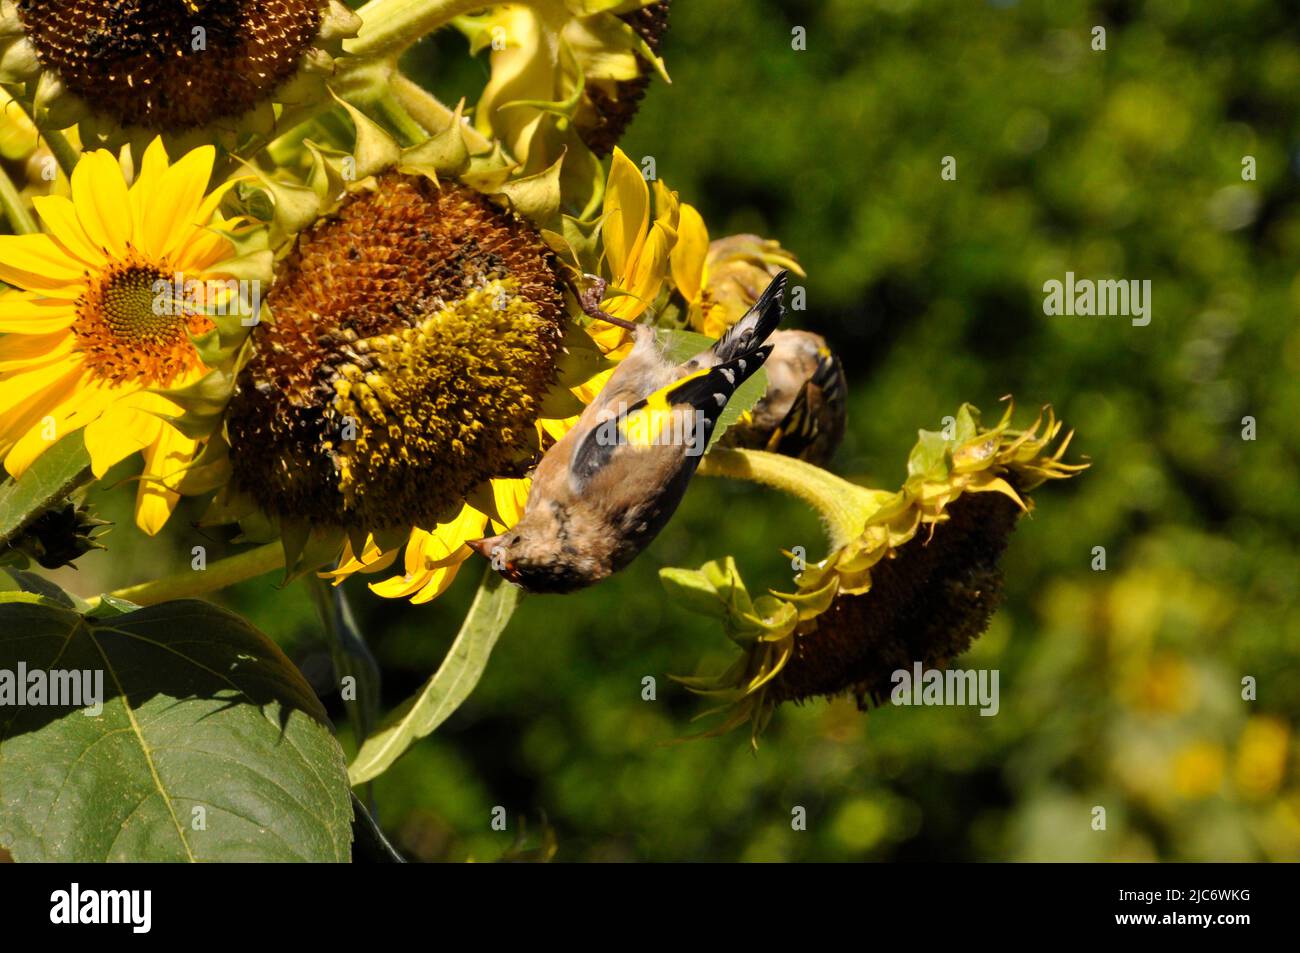 Goldfinches, 'Carduelis carduelis' acrobatically feeding on the seed of sunflowers 'Helianthus' growing in a small field on the island of St Martin's, Stock Photo